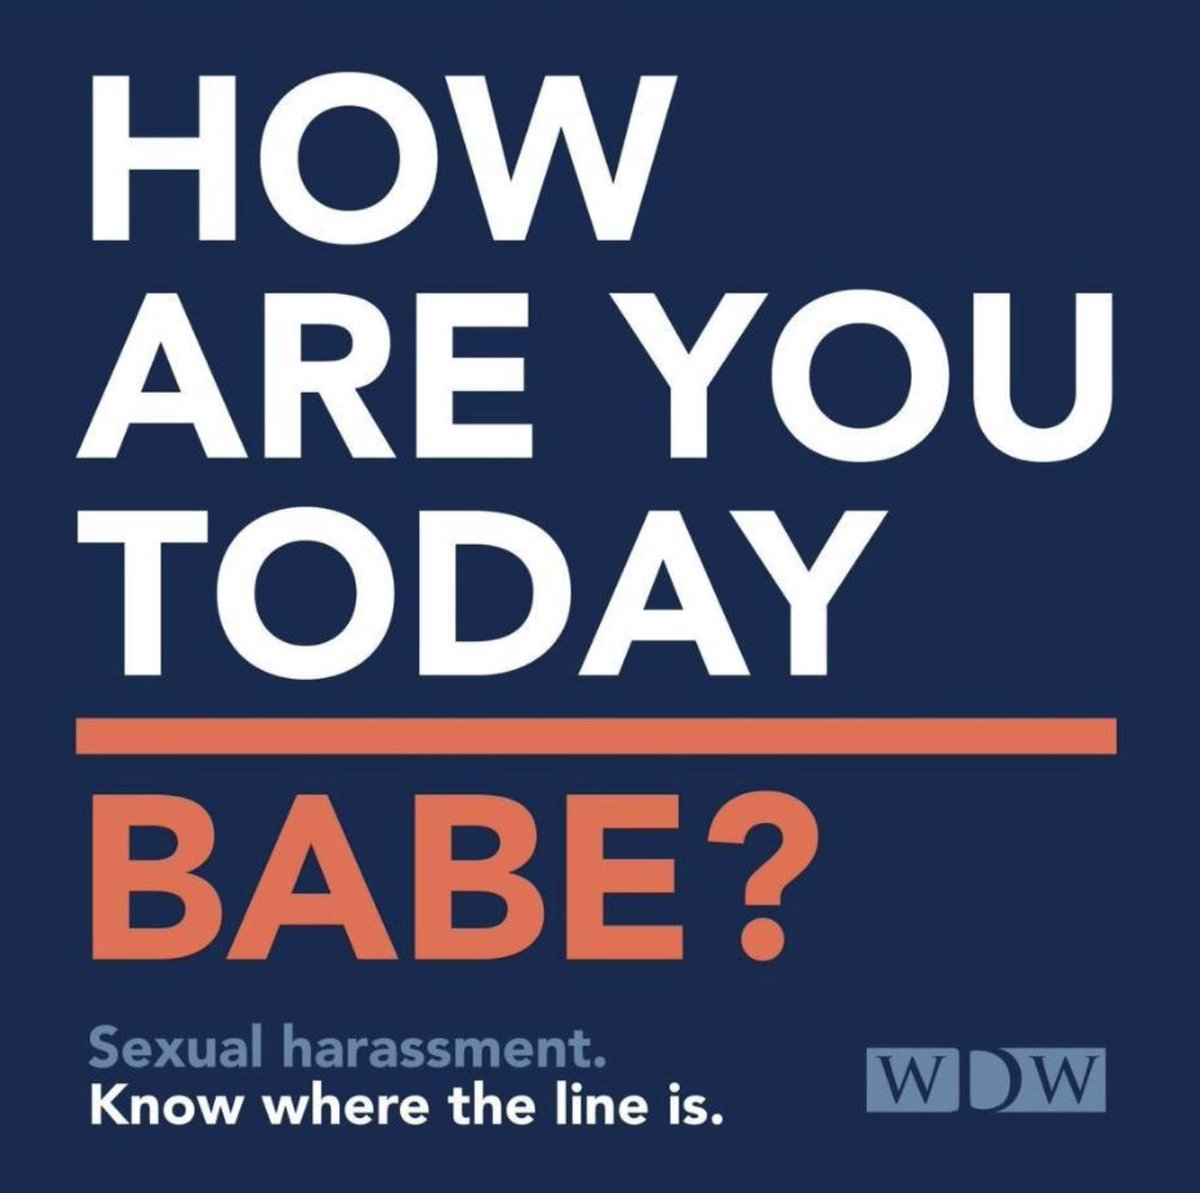 Sexual harassment - know where the line is.

Visit WDWLawFirm.com or give us a call at 864.231.8090 to schedule your consultation.

#Lawyer #SCLawyer #Attorney #LegalServices #UpstateSC #SexualHarassmentLawyer #WDWLaw #protect #justice #law #SCLaw #harrassment